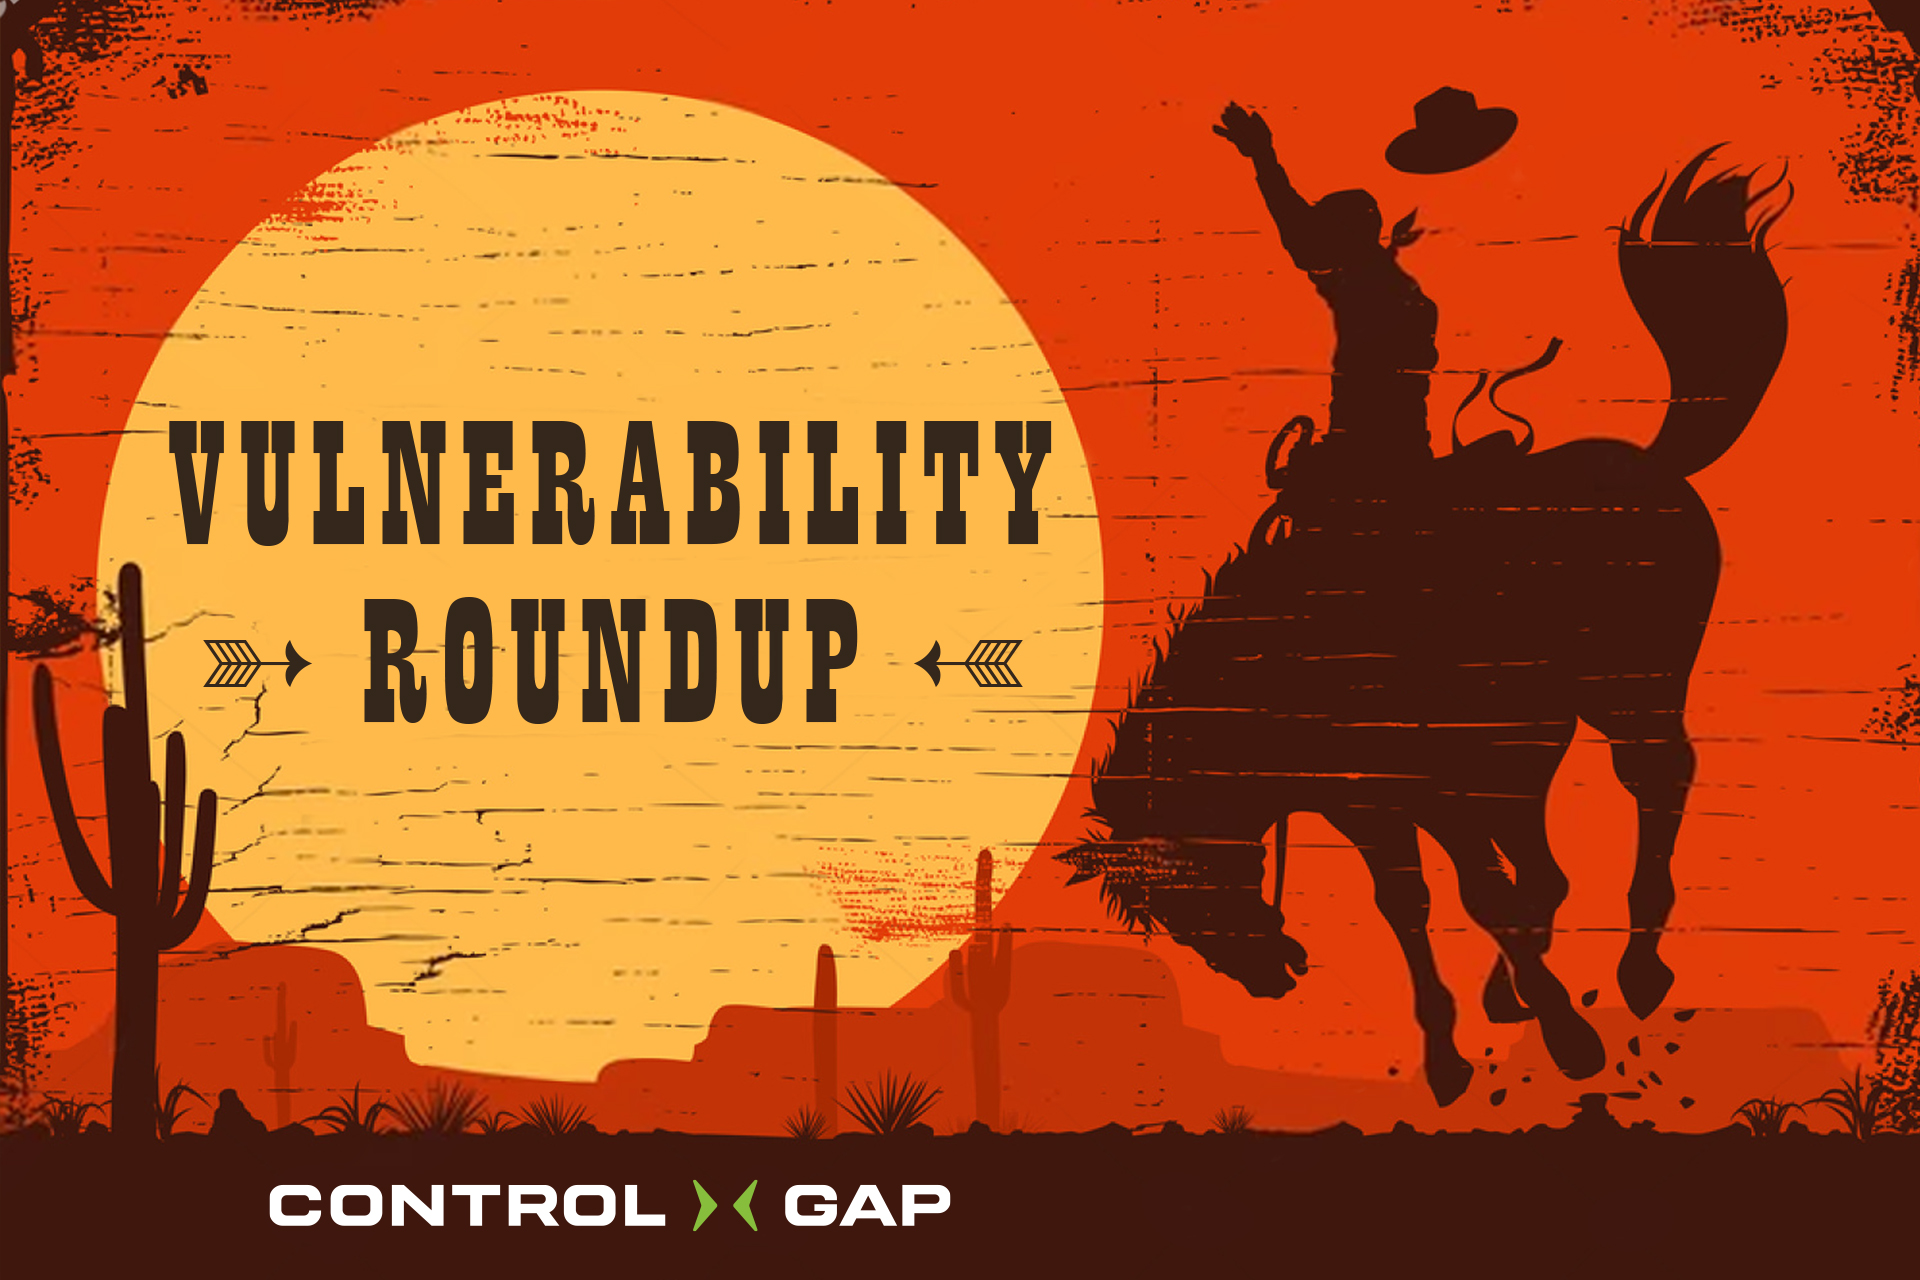 Control Gap Vulnerability Roundup: August 20th to August 26th